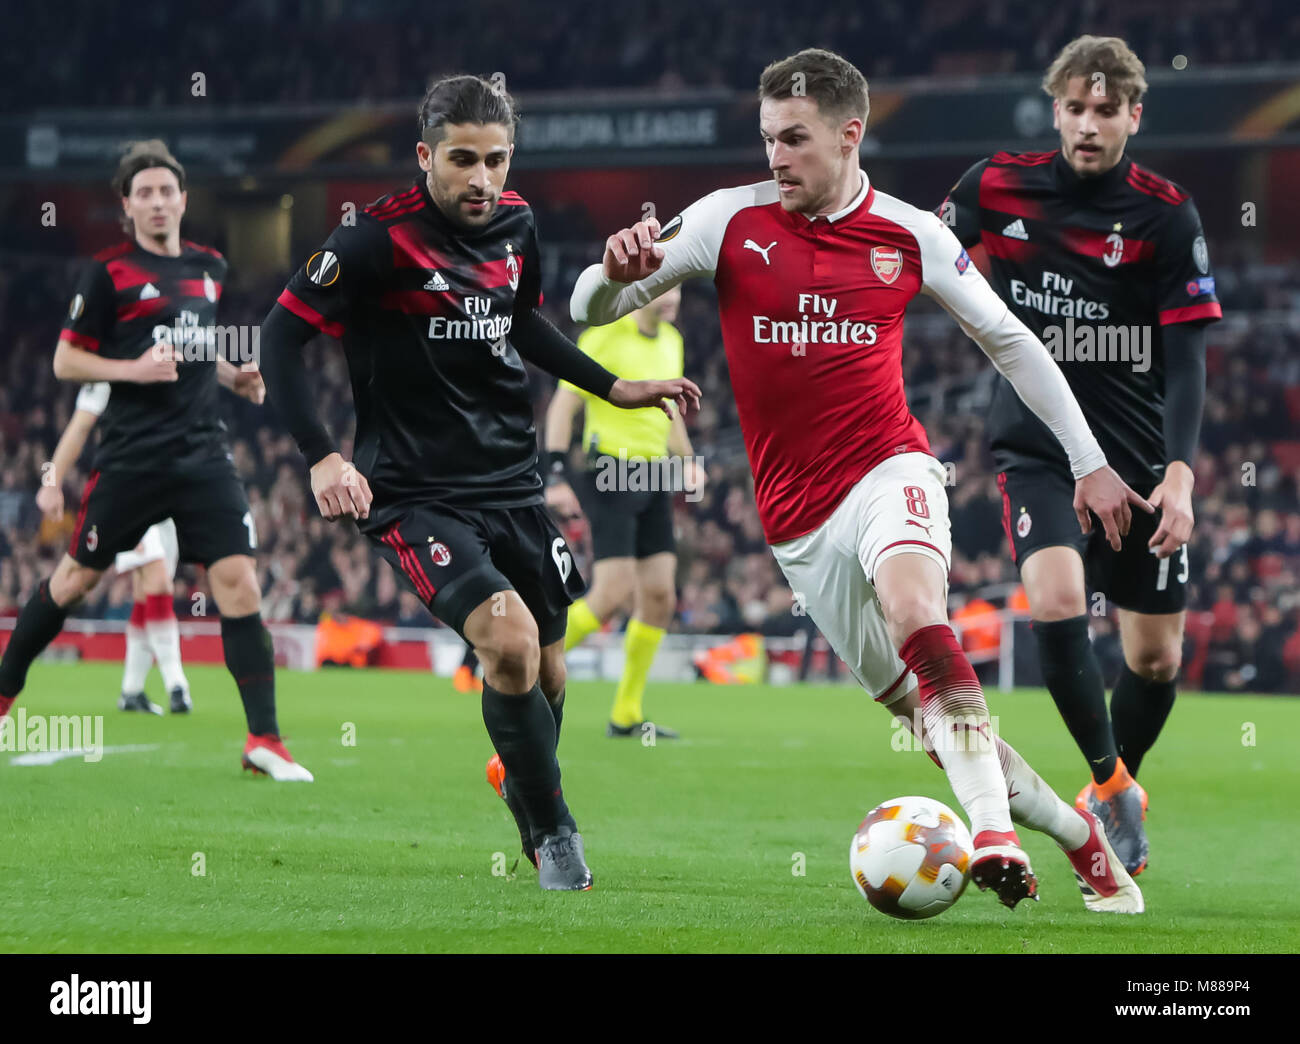 London, UK. 15th Mar, 2018. Aaron Ramsey (C) of Arsenal breaks through during the UEFA Europa League round of 16 second-leg match against AC Milan at the Emirates Stadium in London, Britain on March 15, 2018. Arsenal beat AC Milan 3-1 and advanced to the quarterfinal with a 5-1 aggregate. Credit: Richard Washbrooke/Xinhua/Alamy Live News Stock Photo